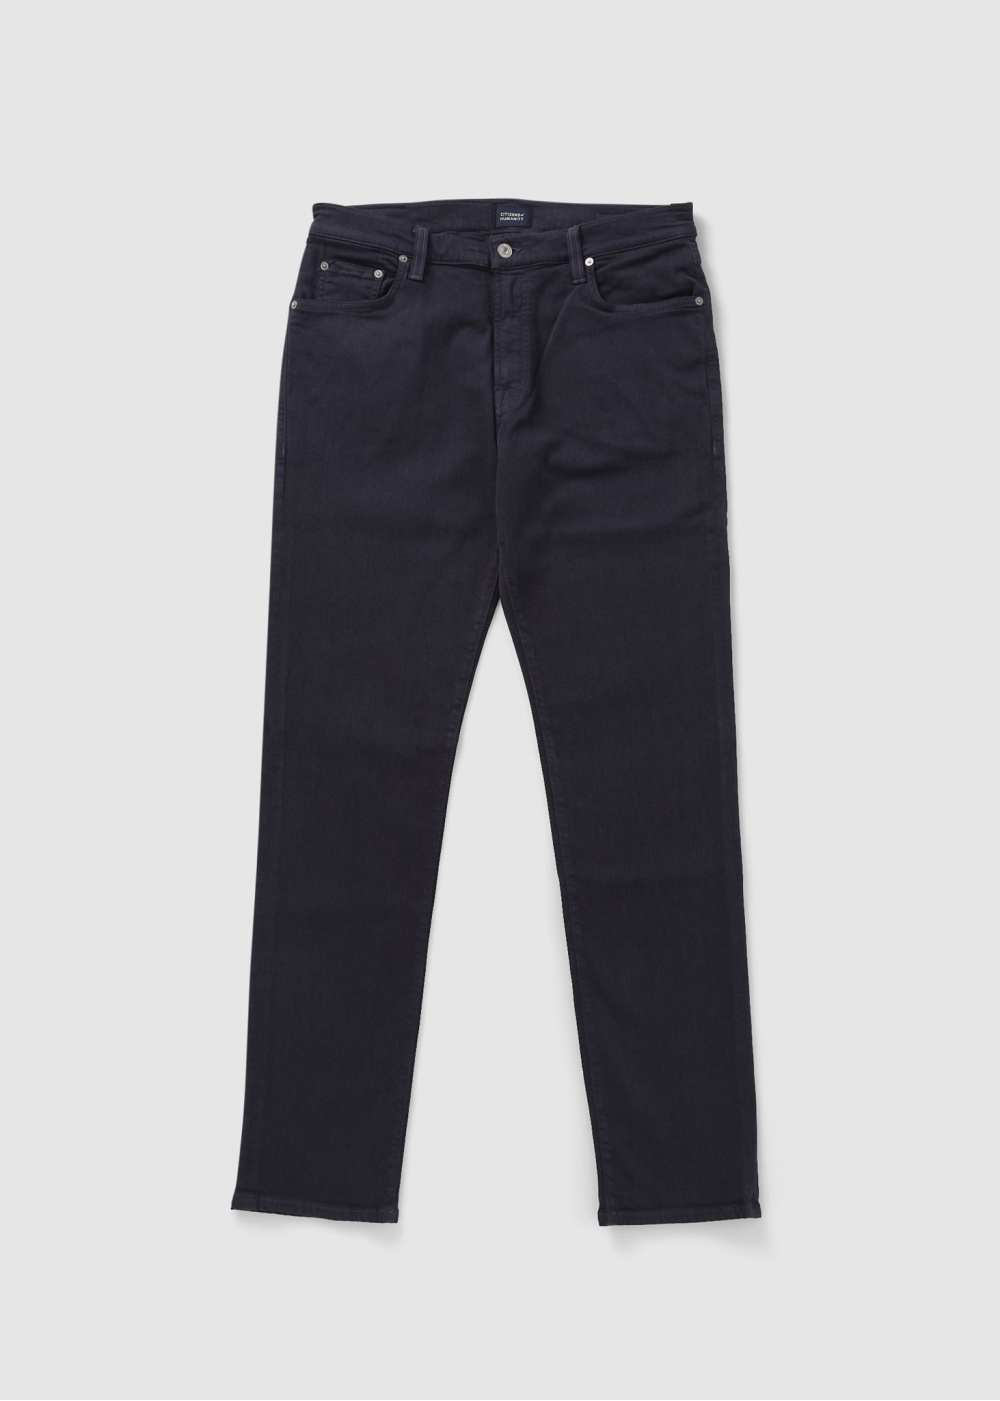 CITIZENS OF HUMANITY Mens Adler In Stretch Twill Jeans In Navy